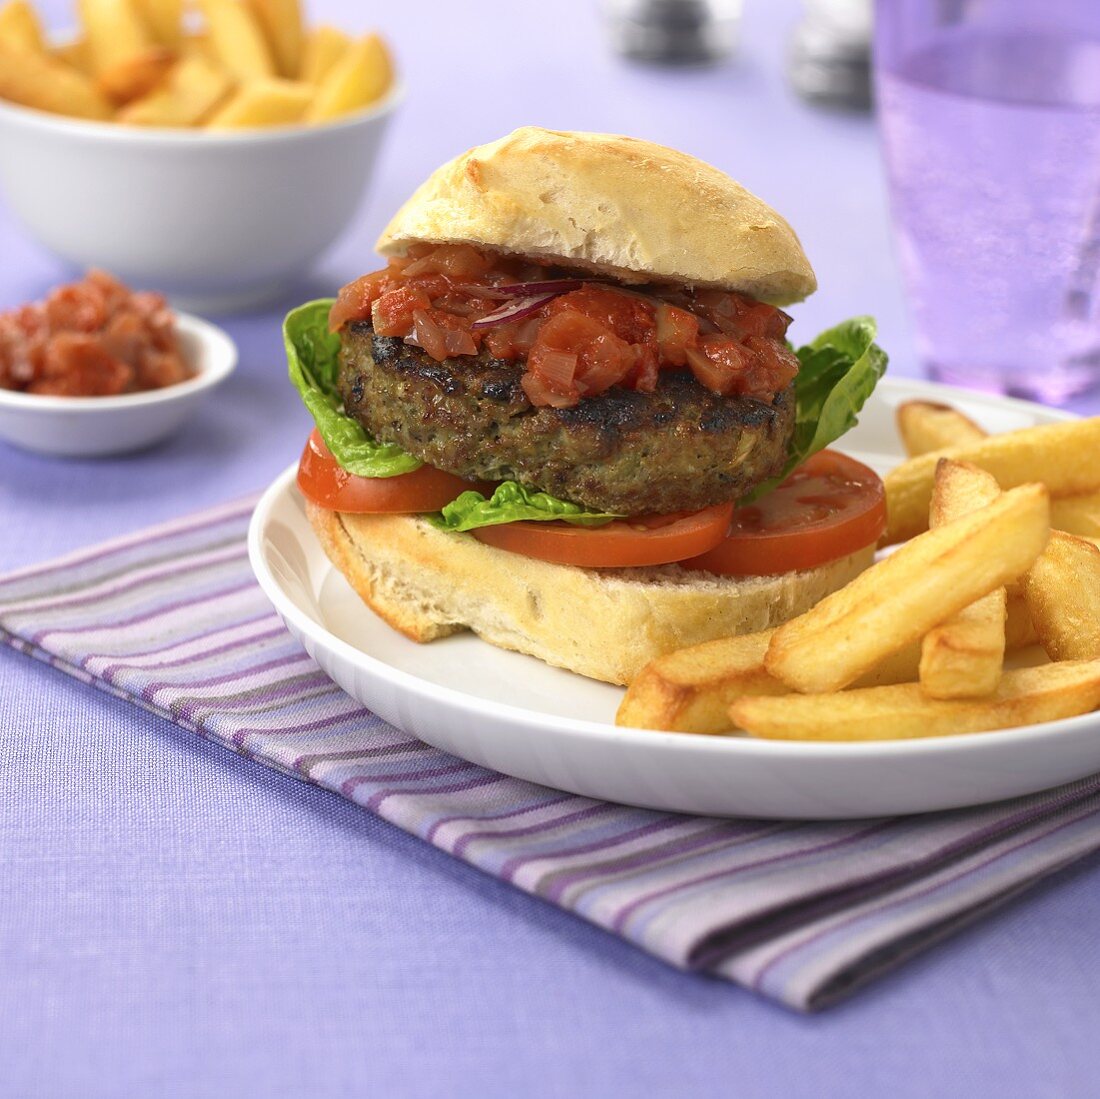 Burger with barbecue sauce and chips